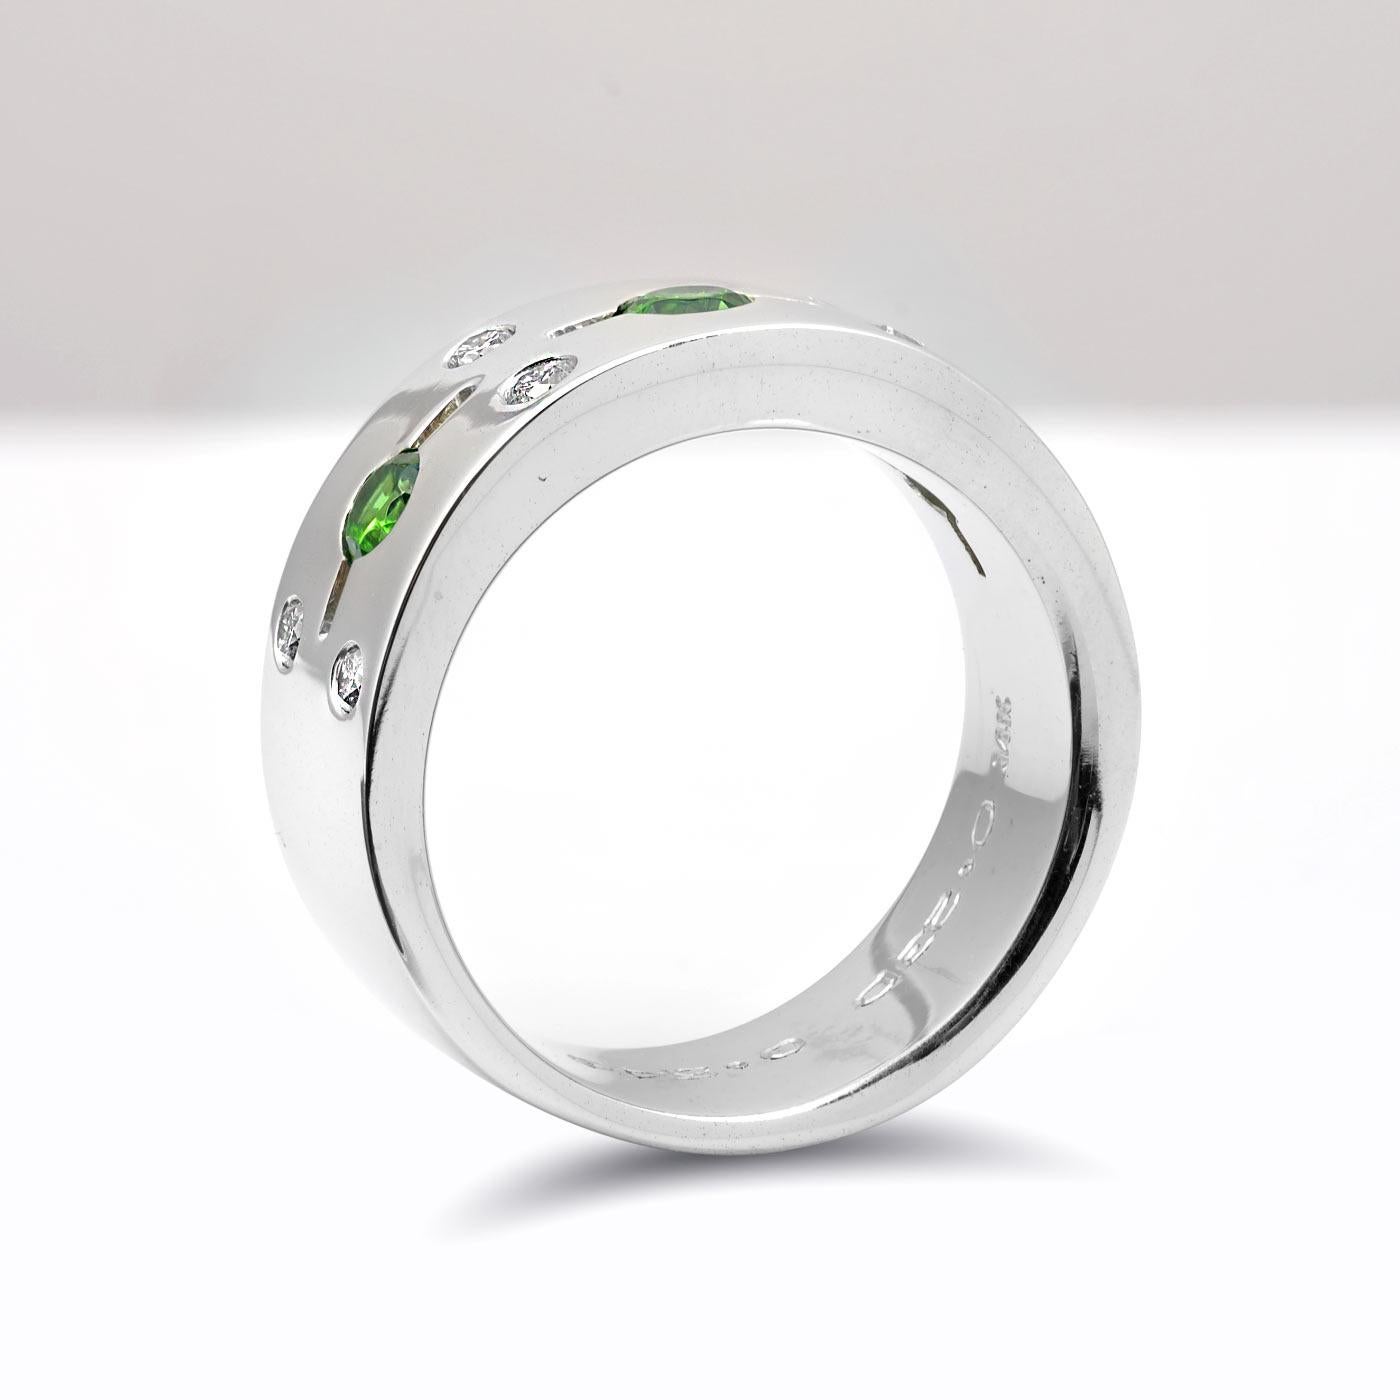 Studded with 3 Russian mined Demantoid garnets, this 14K white gold ring is an absolute beauty. Each filled with a vibrant green these garnets unlike emeralds have exceptional hardness and can withstand a lot of daily wear and tear. Cut to